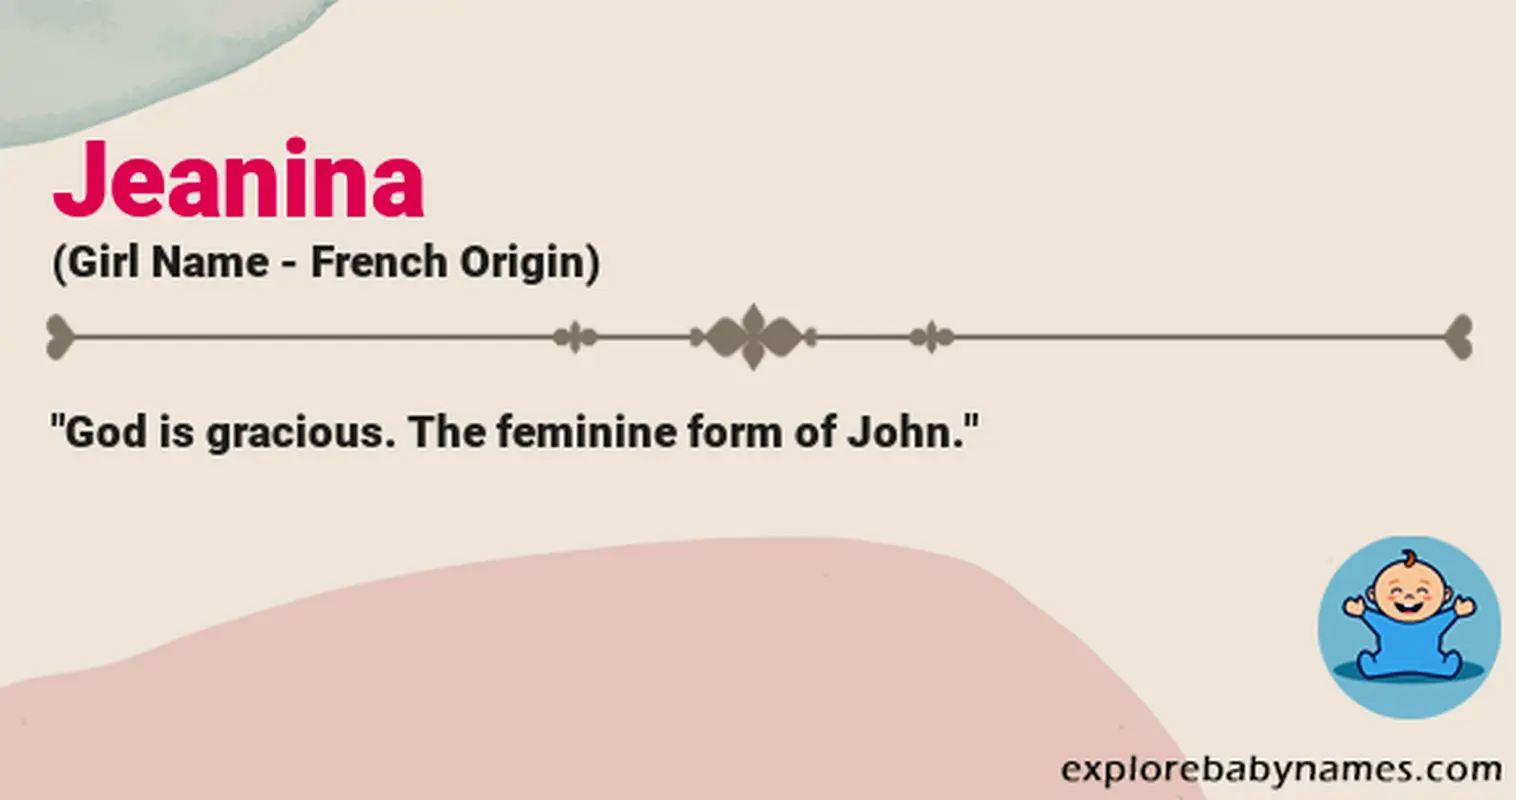 Meaning of Jeanina